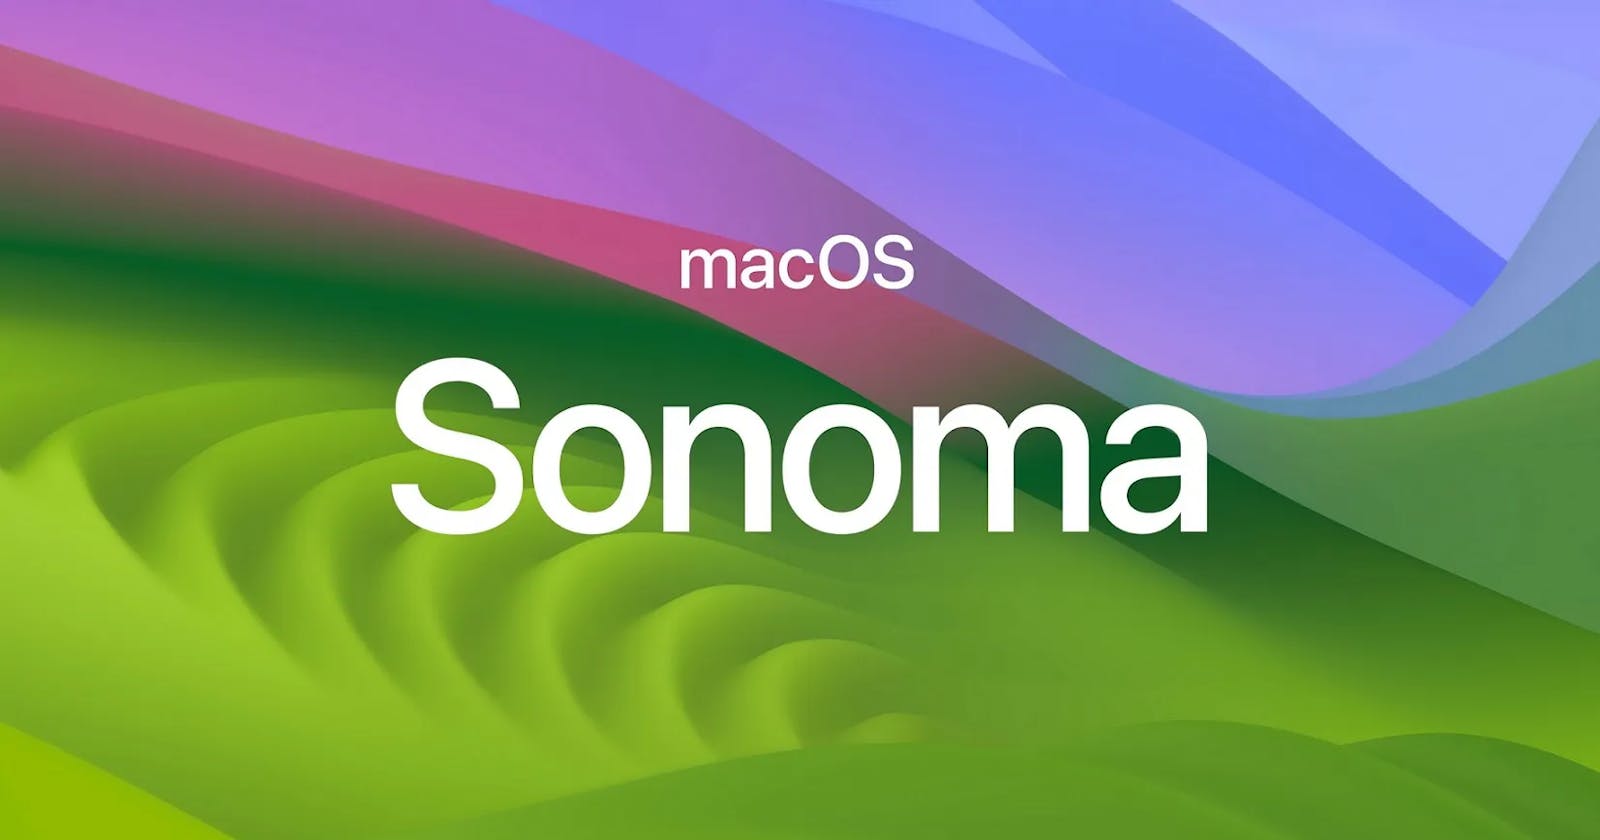 macOS Sonoma features — What I think about it